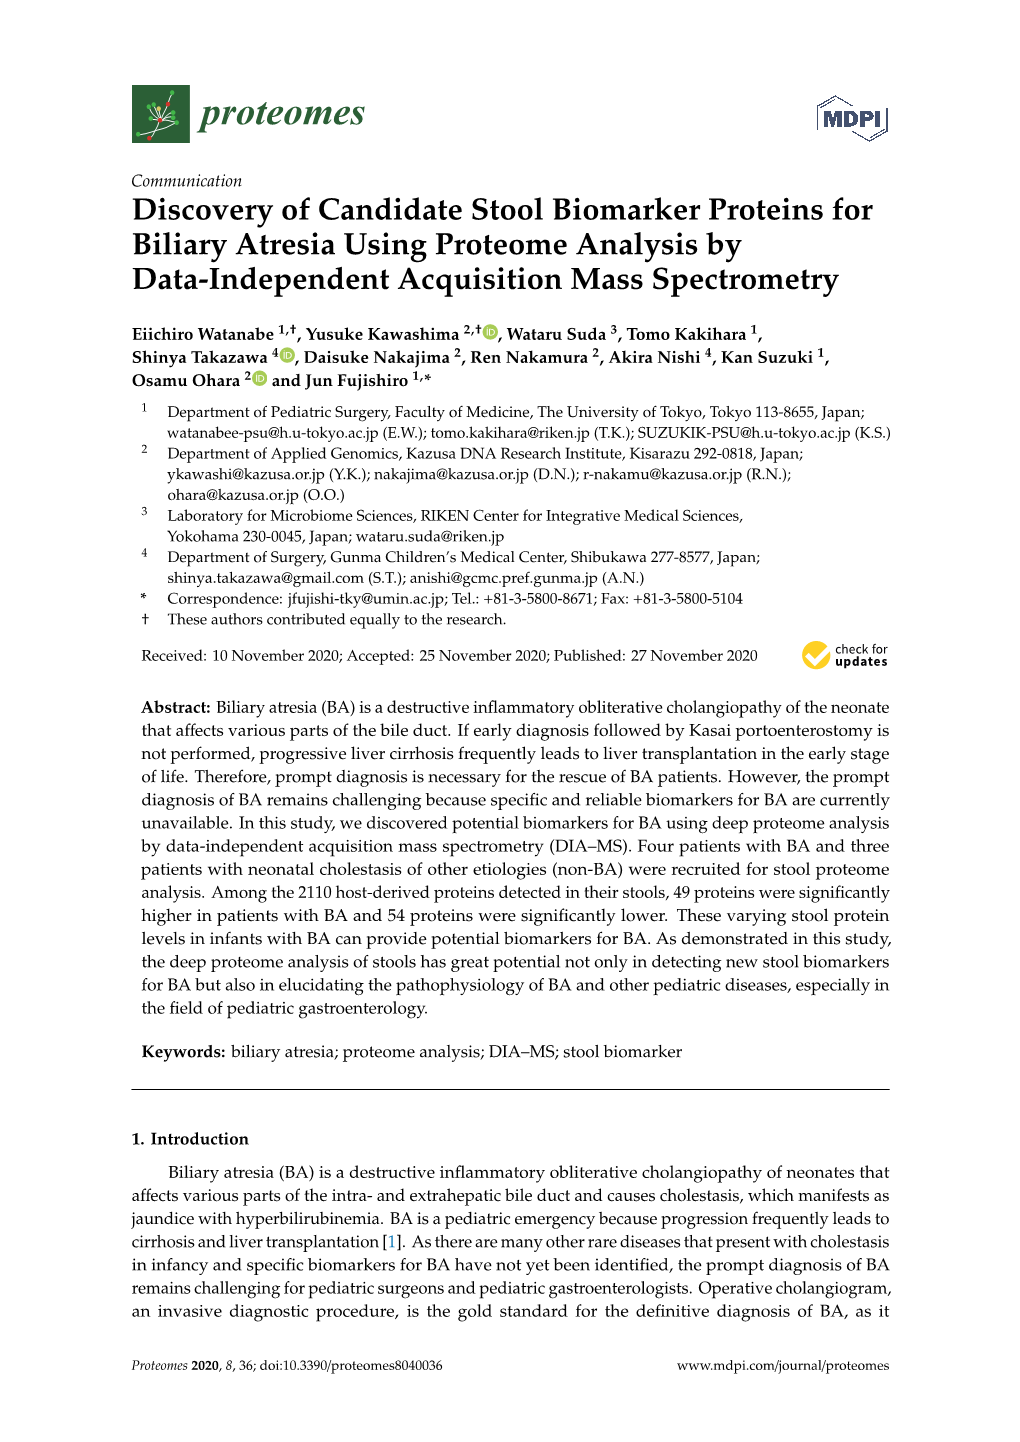 Discovery of Candidate Stool Biomarker Proteins for Biliary Atresia Using Proteome Analysis by Data-Independent Acquisition Mass Spectrometry